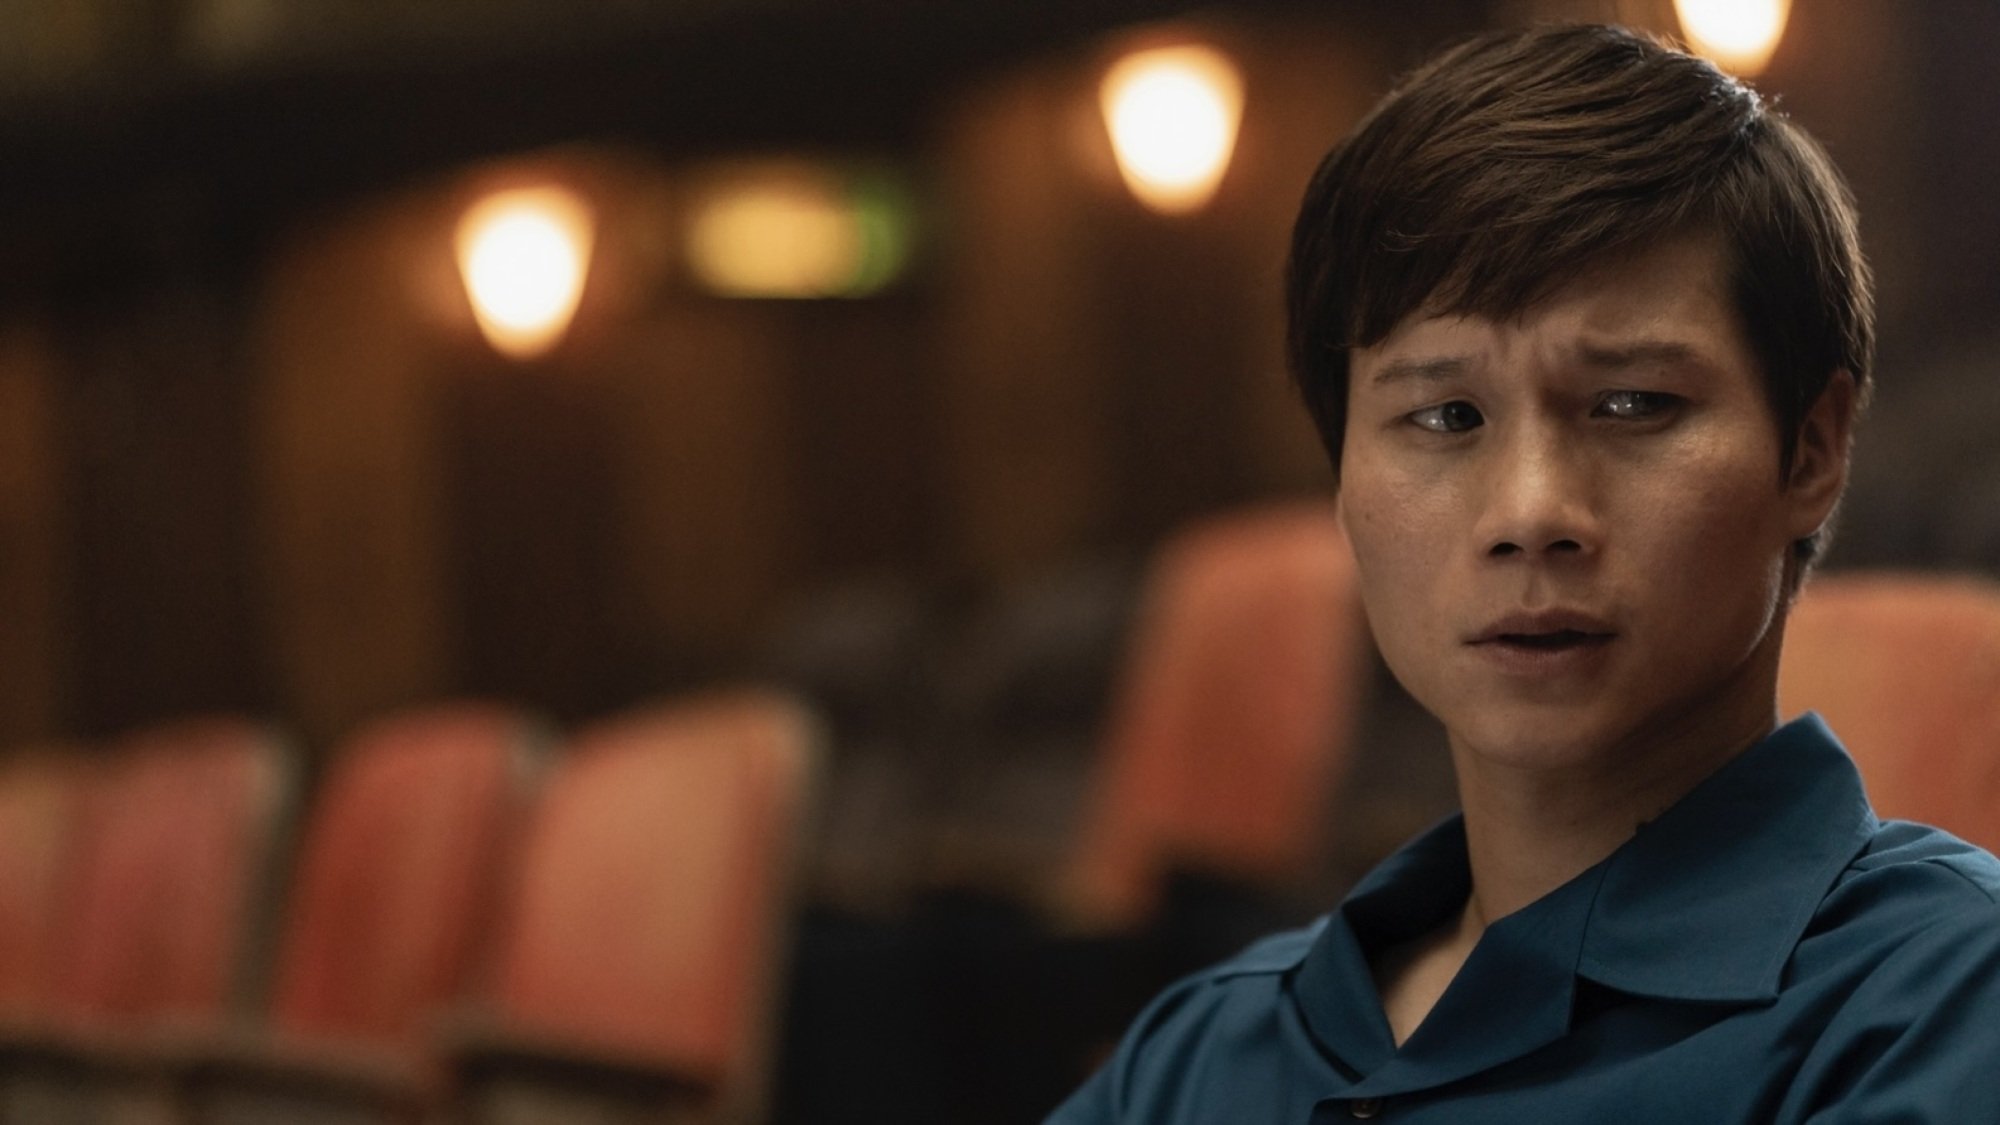 A man in a blue collared shirt sitting in a movie theater, looking anxious.